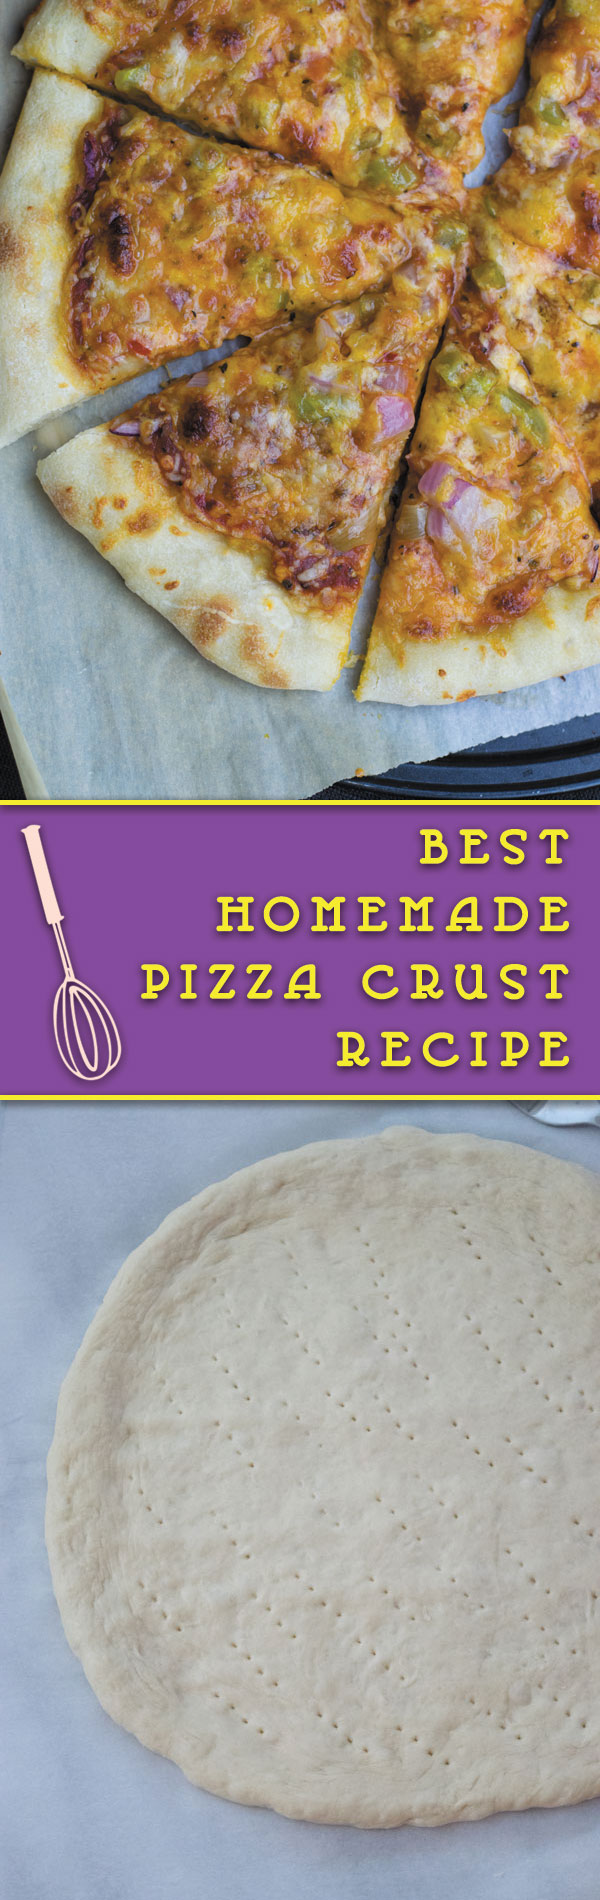 best homemade pizza crust recipe - chewy & crisp, just few simple steps, this will become your got to PIZZA CRUST RECIPE.